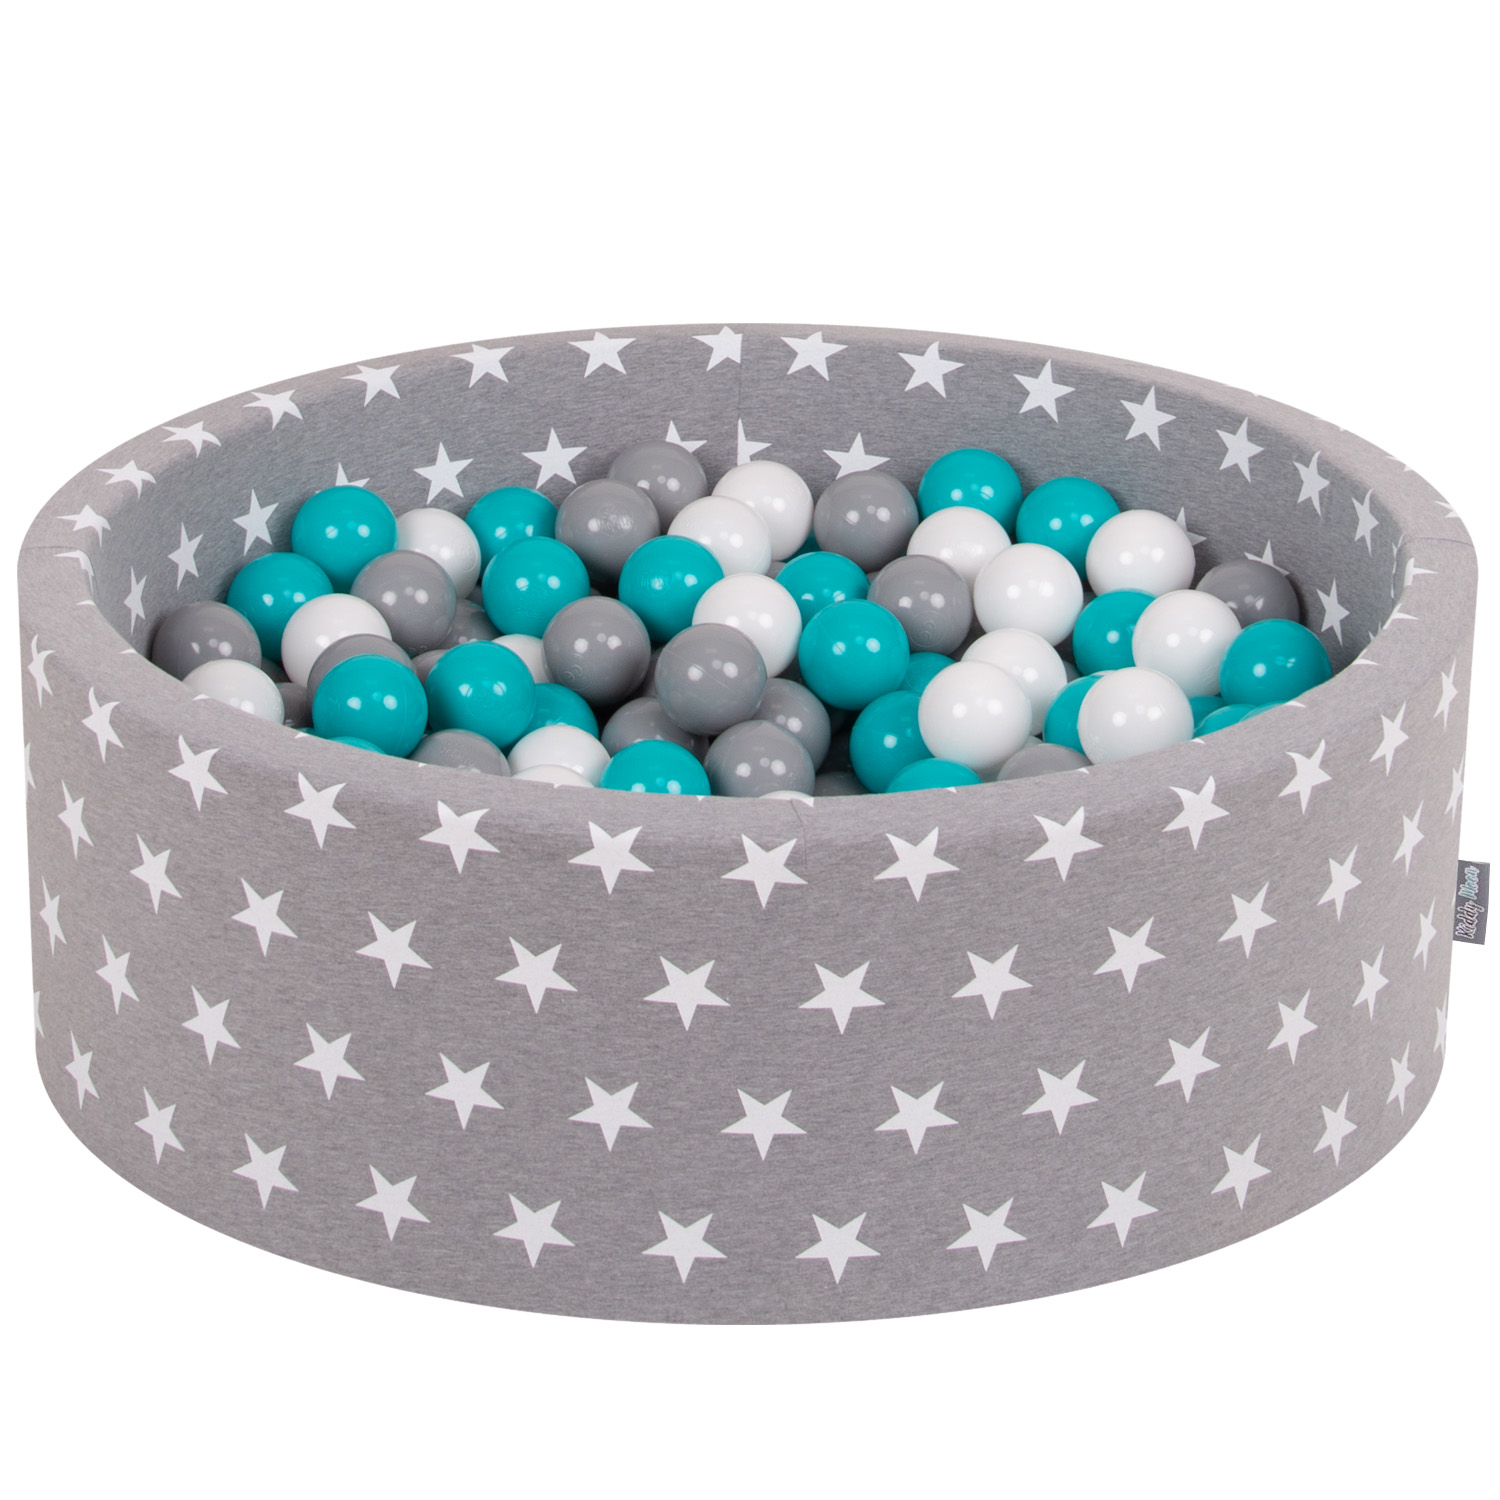 New Soft White Foam Ball Pit Pool Round for Baby Toddler 250 Multicoloured Balls 